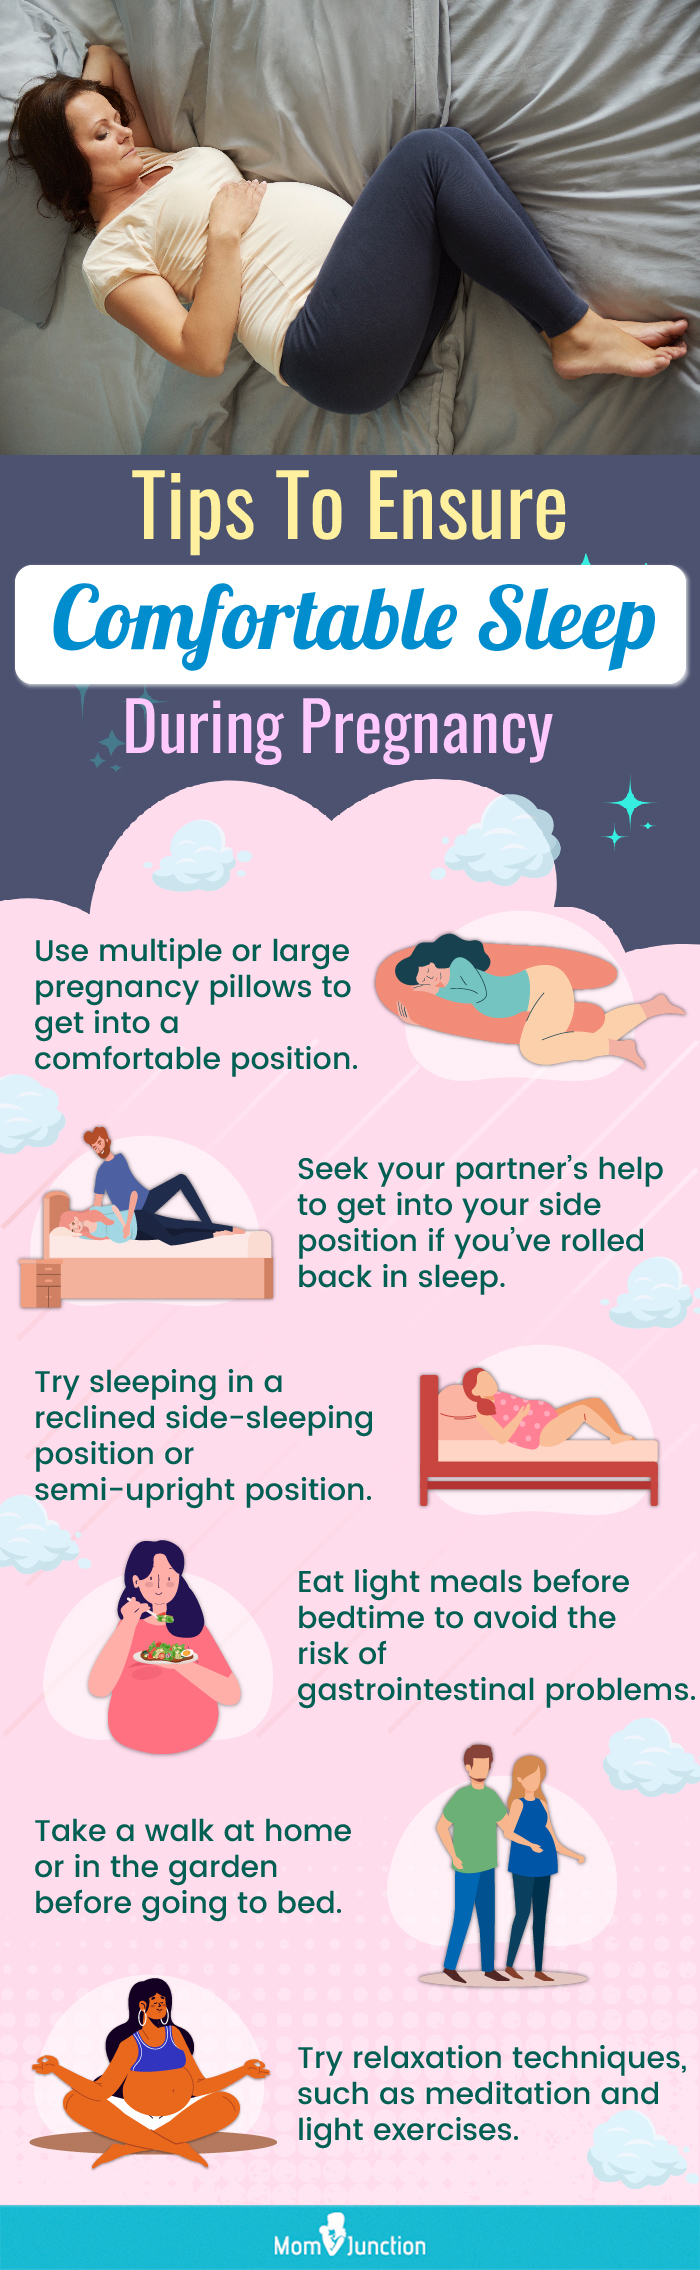 Sleeping Positions During Pregnancy: What's Safe And What's Not